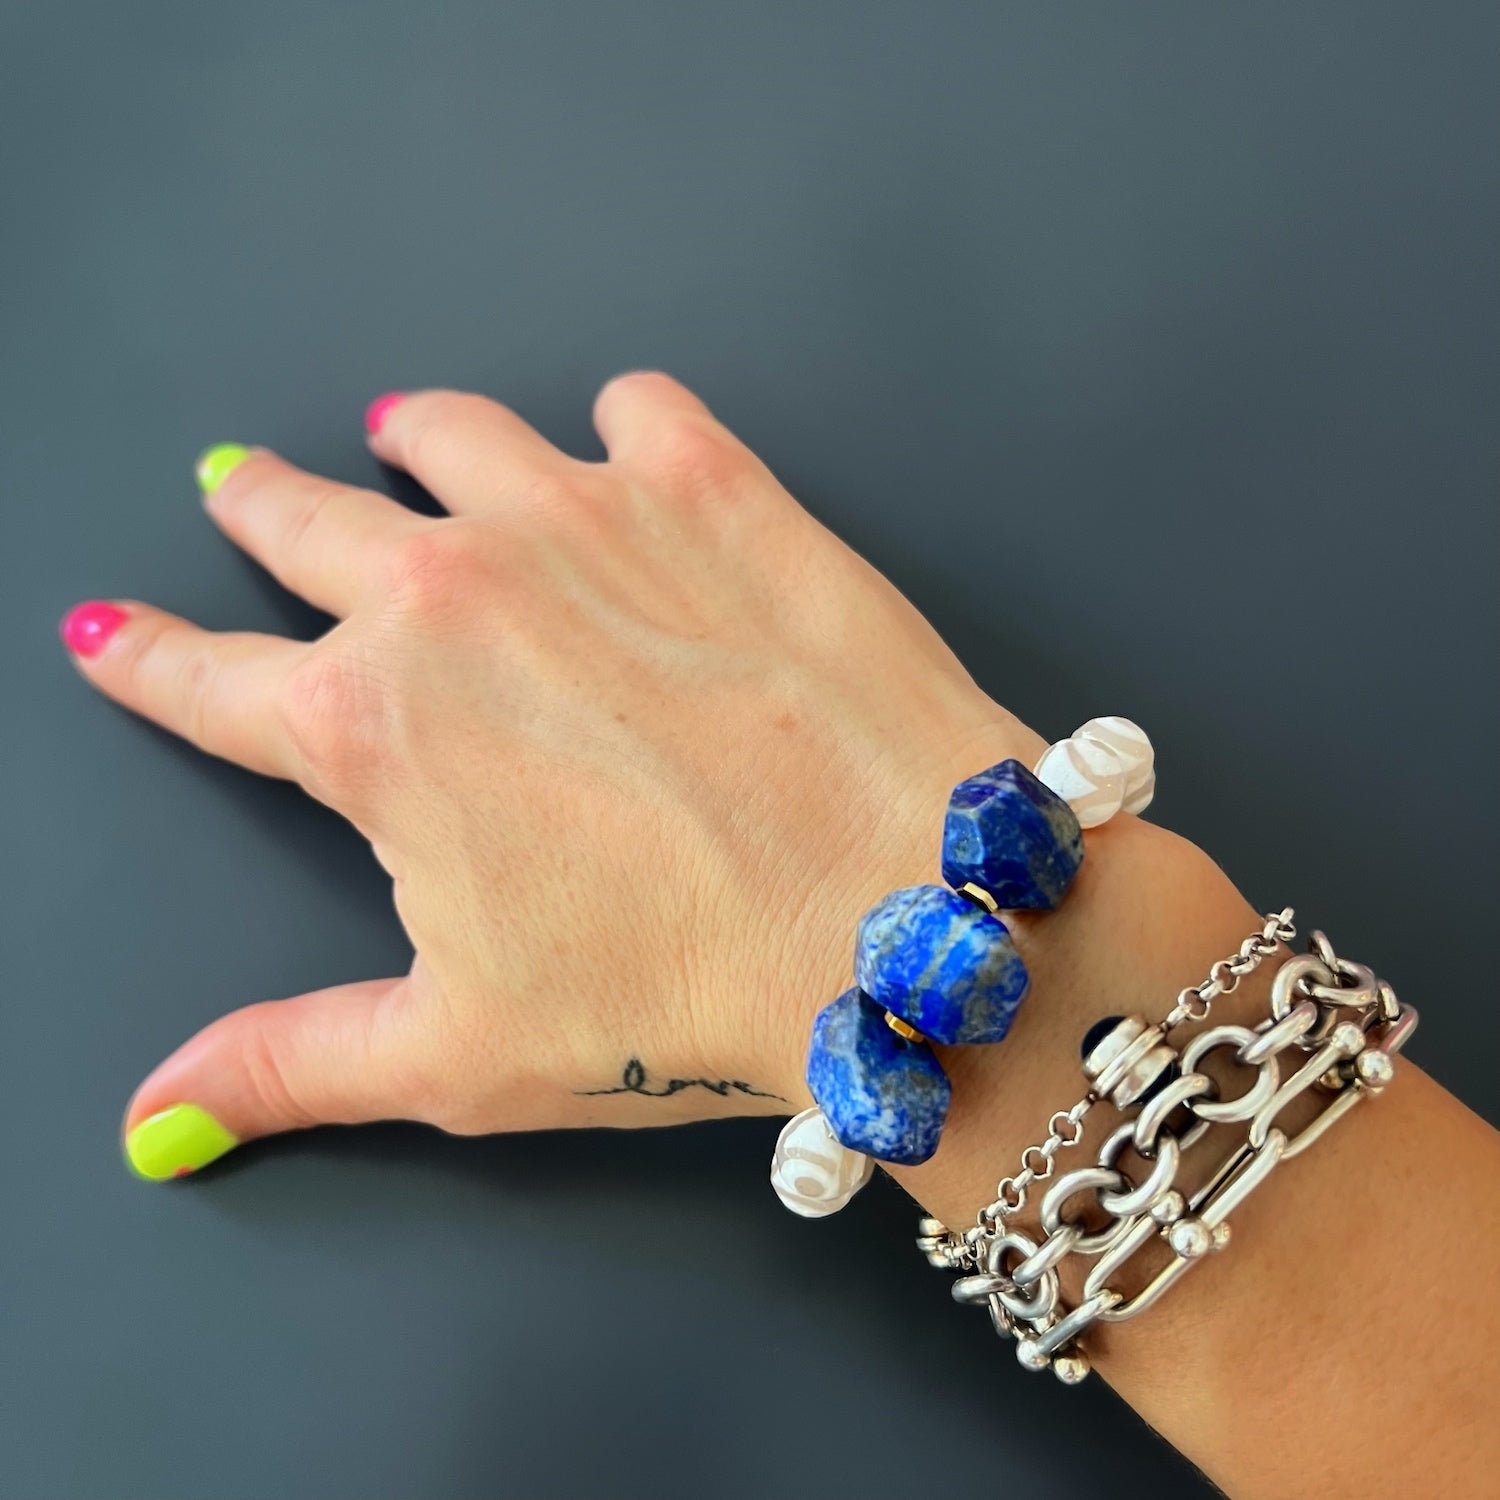 Eye of Love Lapis Lazuli Bracelet on Hand Model - Unique and eye-catching, featuring Lapis Lazuli, White Nepal agate, and a Gold plated blue enamel heart.